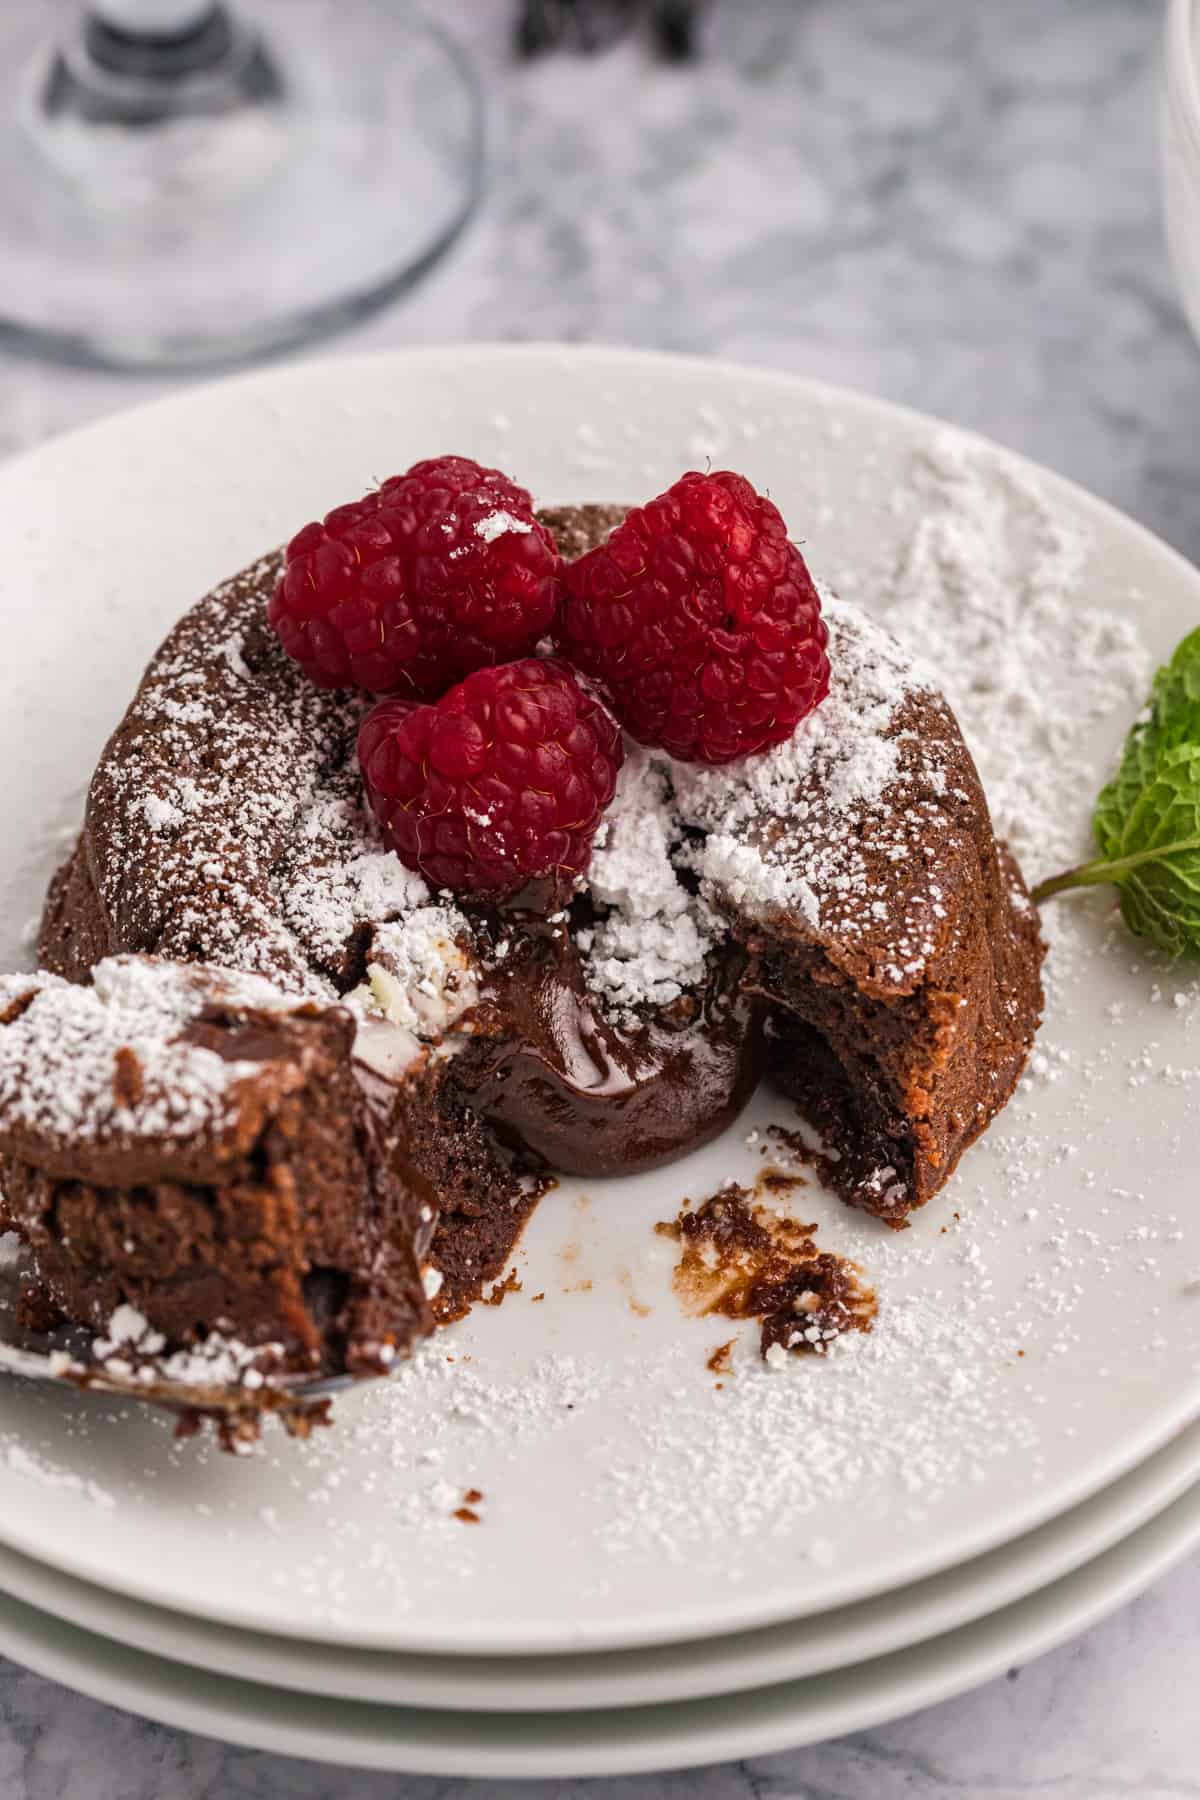 Fresh raspberries and powdered sugar are placed on top of a chocolate lava cake.